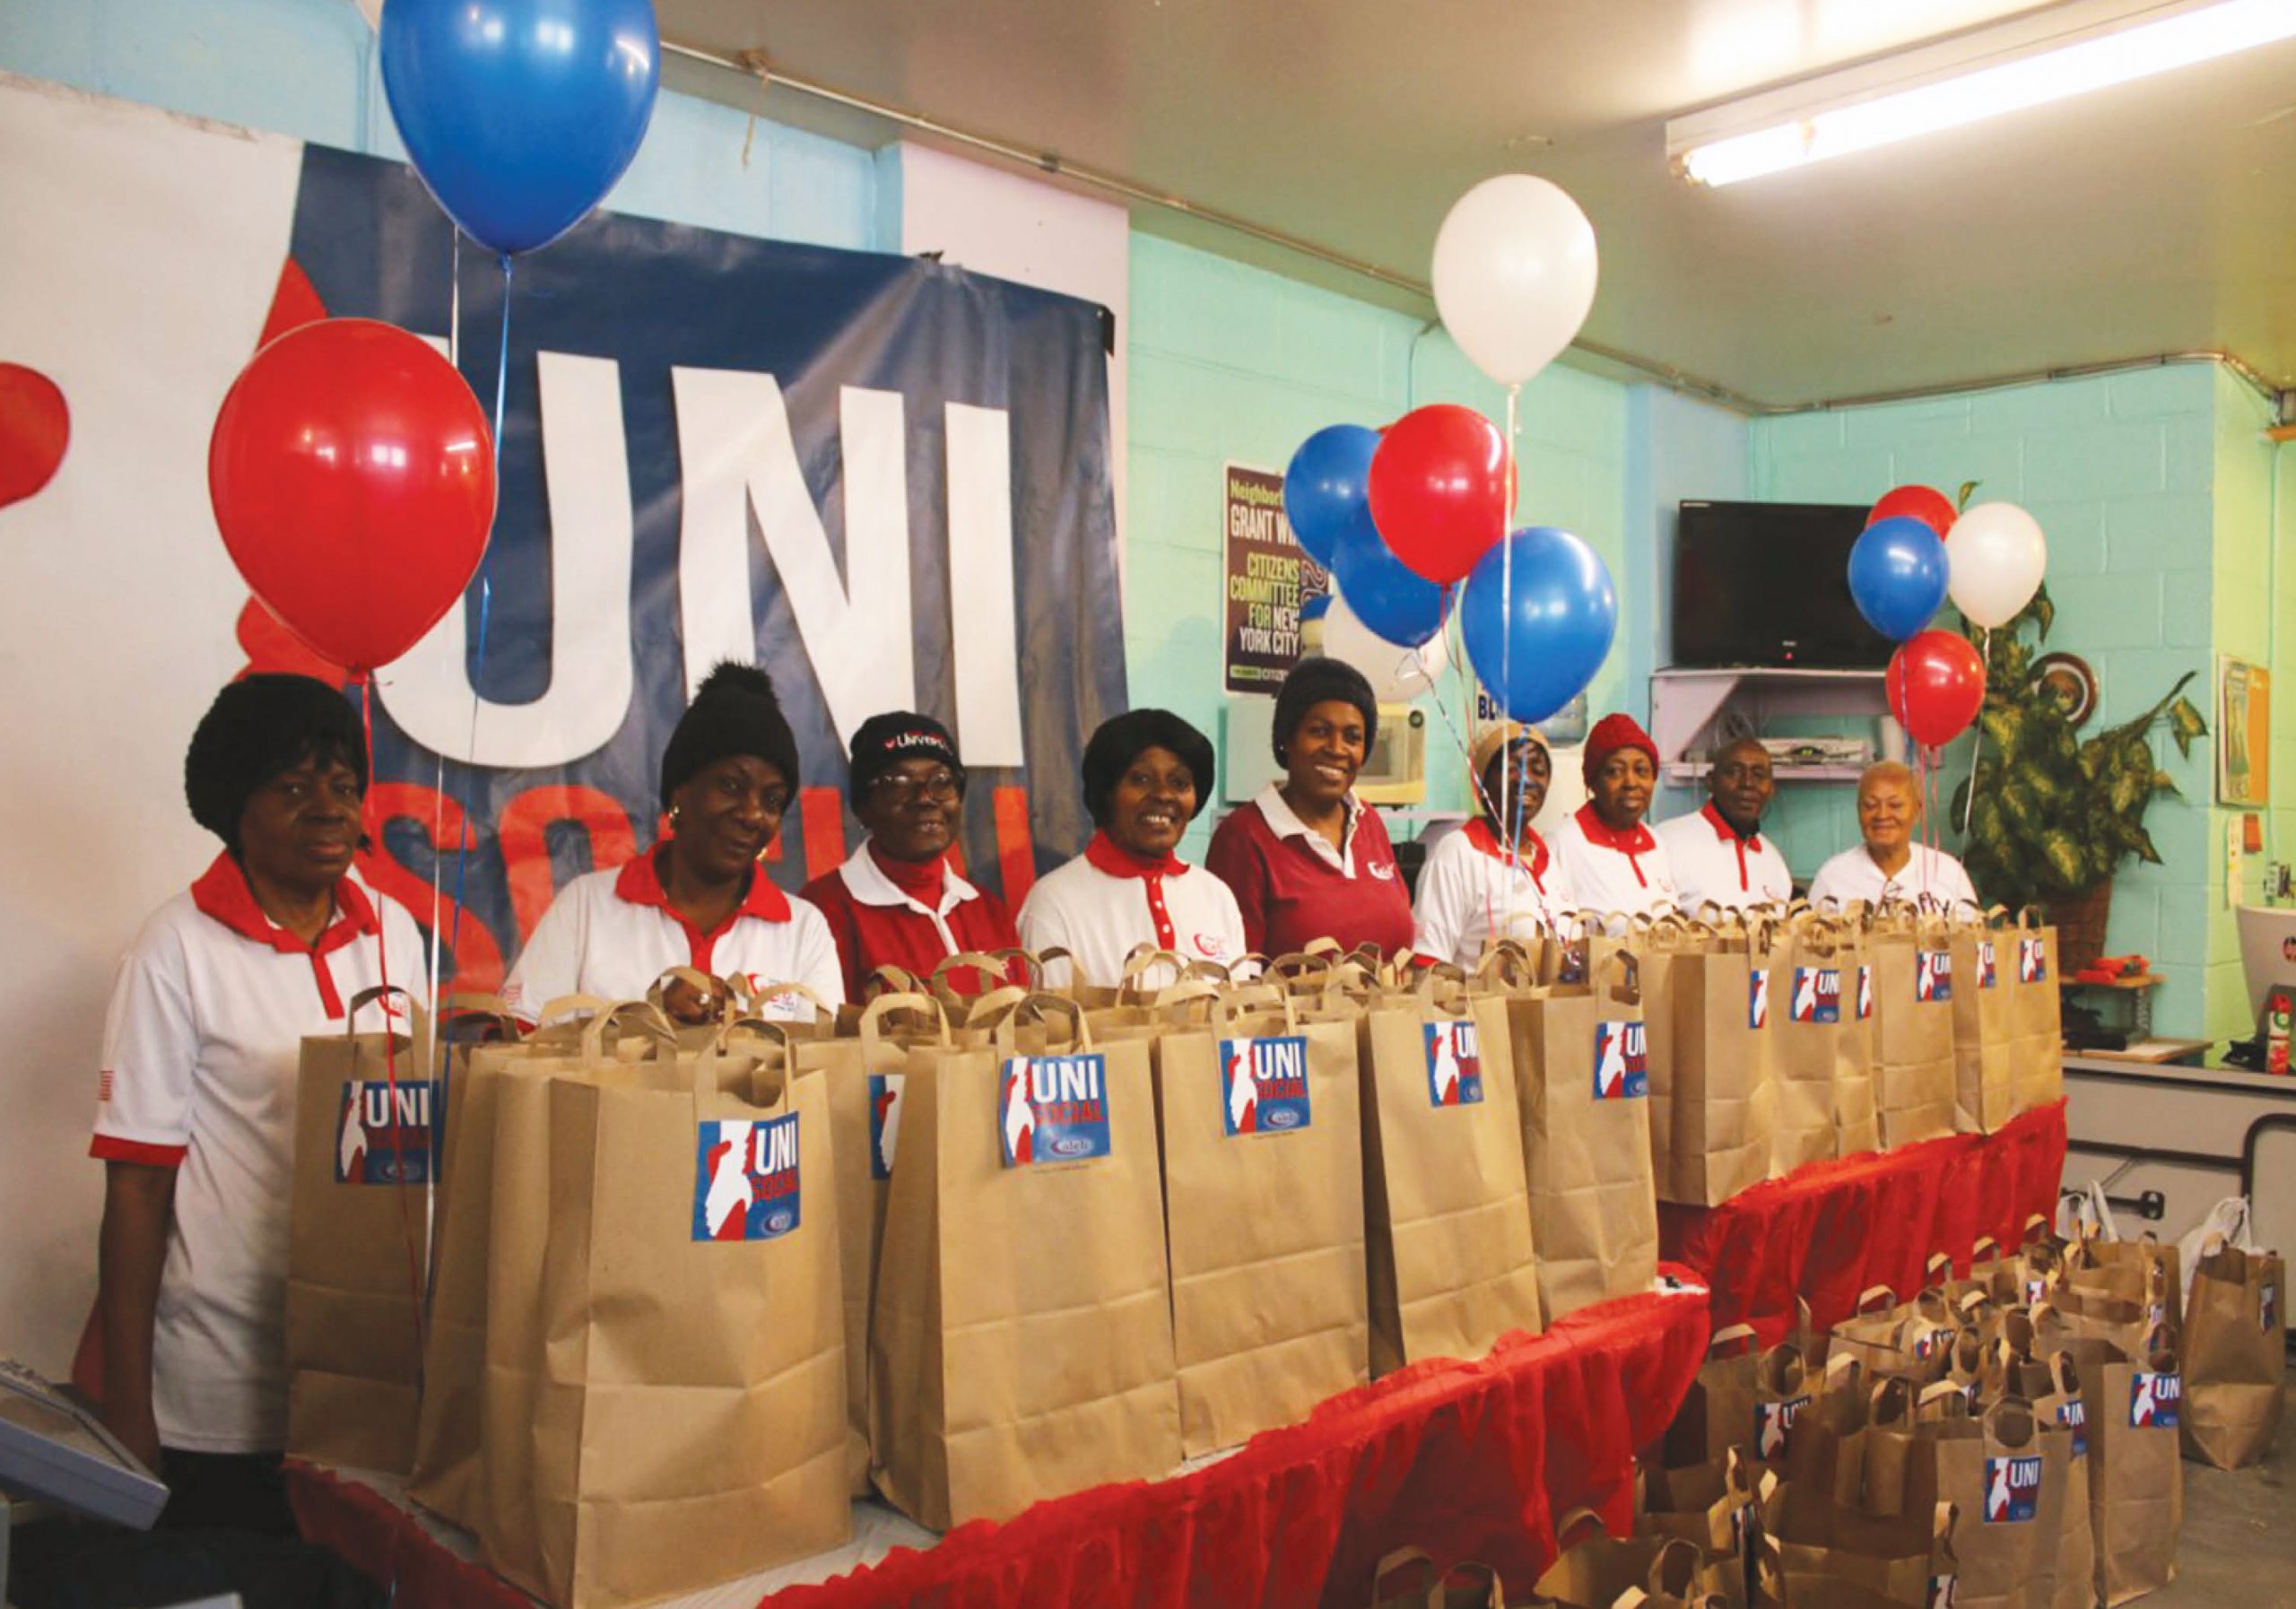 UniSocial and the Caleb group give back to the community2 min read